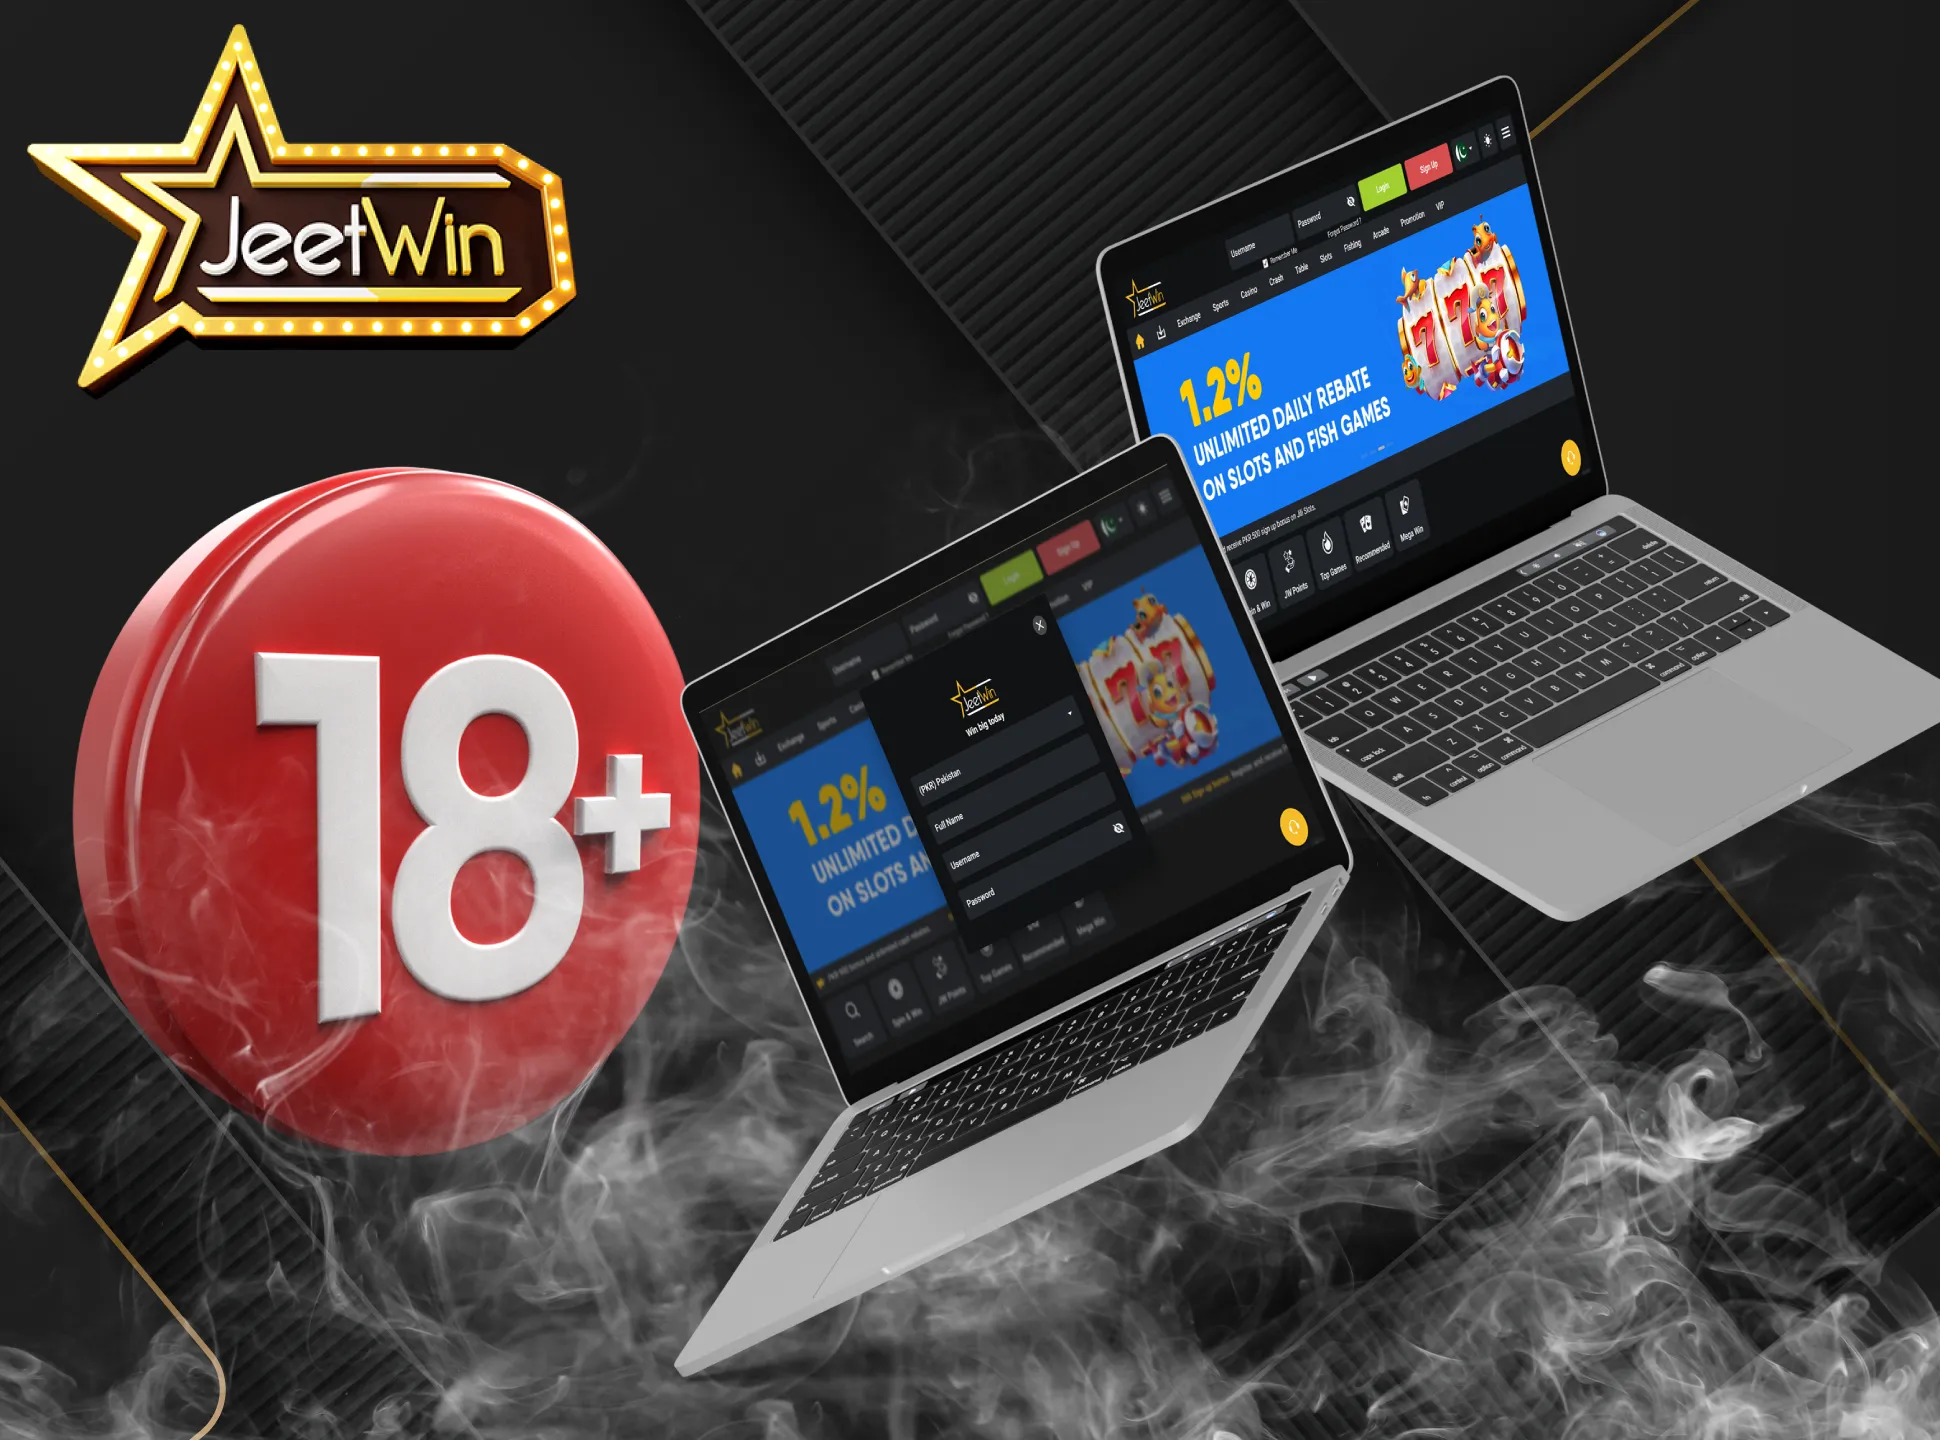 Read the terms and conditions for creating an account at JeetWin Online Casino.